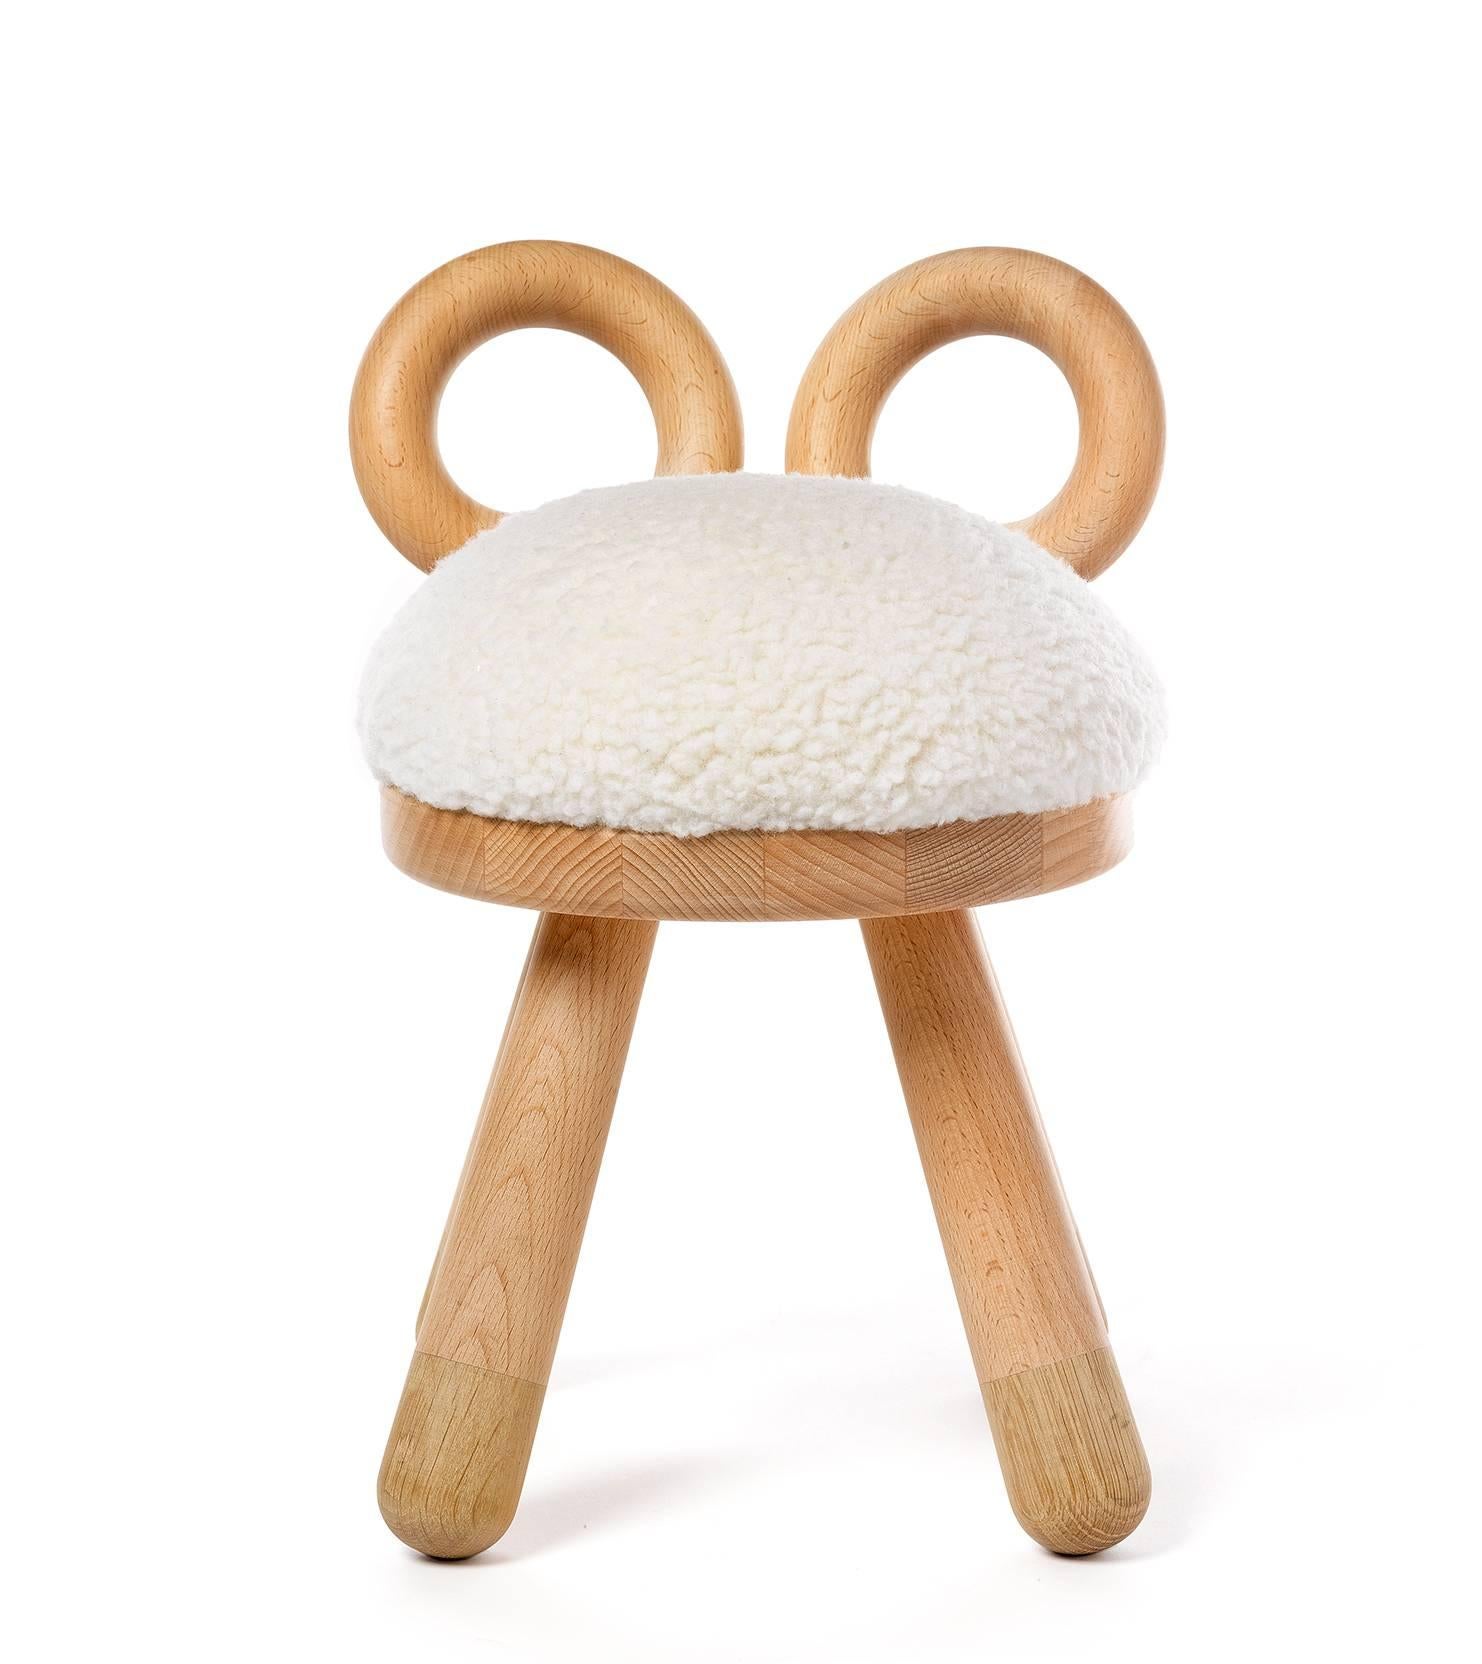 Sheep Chair by Takeshi Sawada for EO in Beech, Oak, and Faux Fur

The series also includes the Bambi Chair and the Cow Chair. See separate 1stdibs listing. 

Designed by Takeshi Sawada
Produced by EO
Copenhagen, 2015
Beech, European oak, faux fur